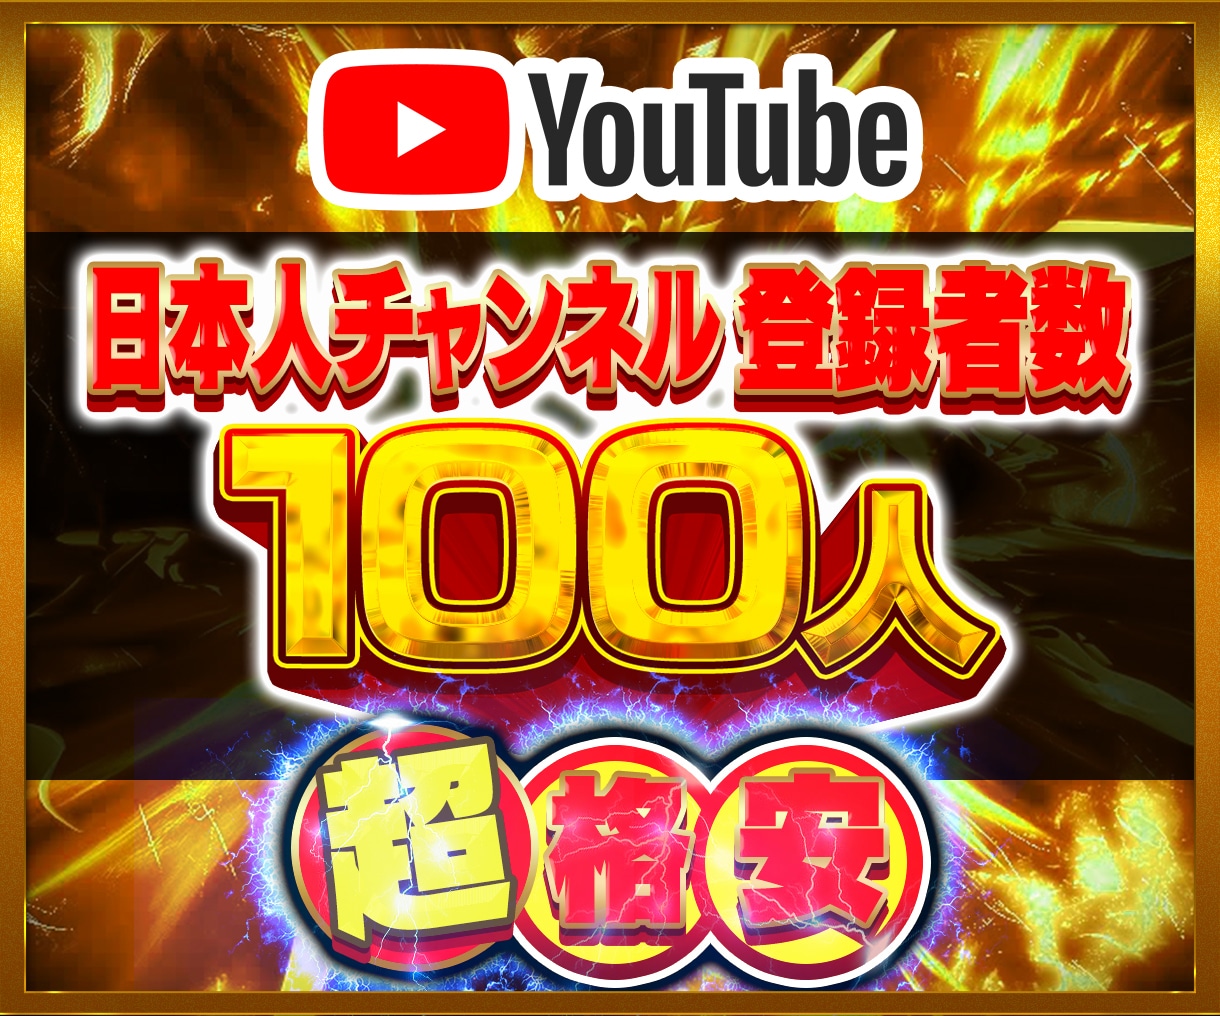 💬Coconara｜Increase YouTube Japanese subscribers by 100
               PAPE industry lowest price available immediately
          …